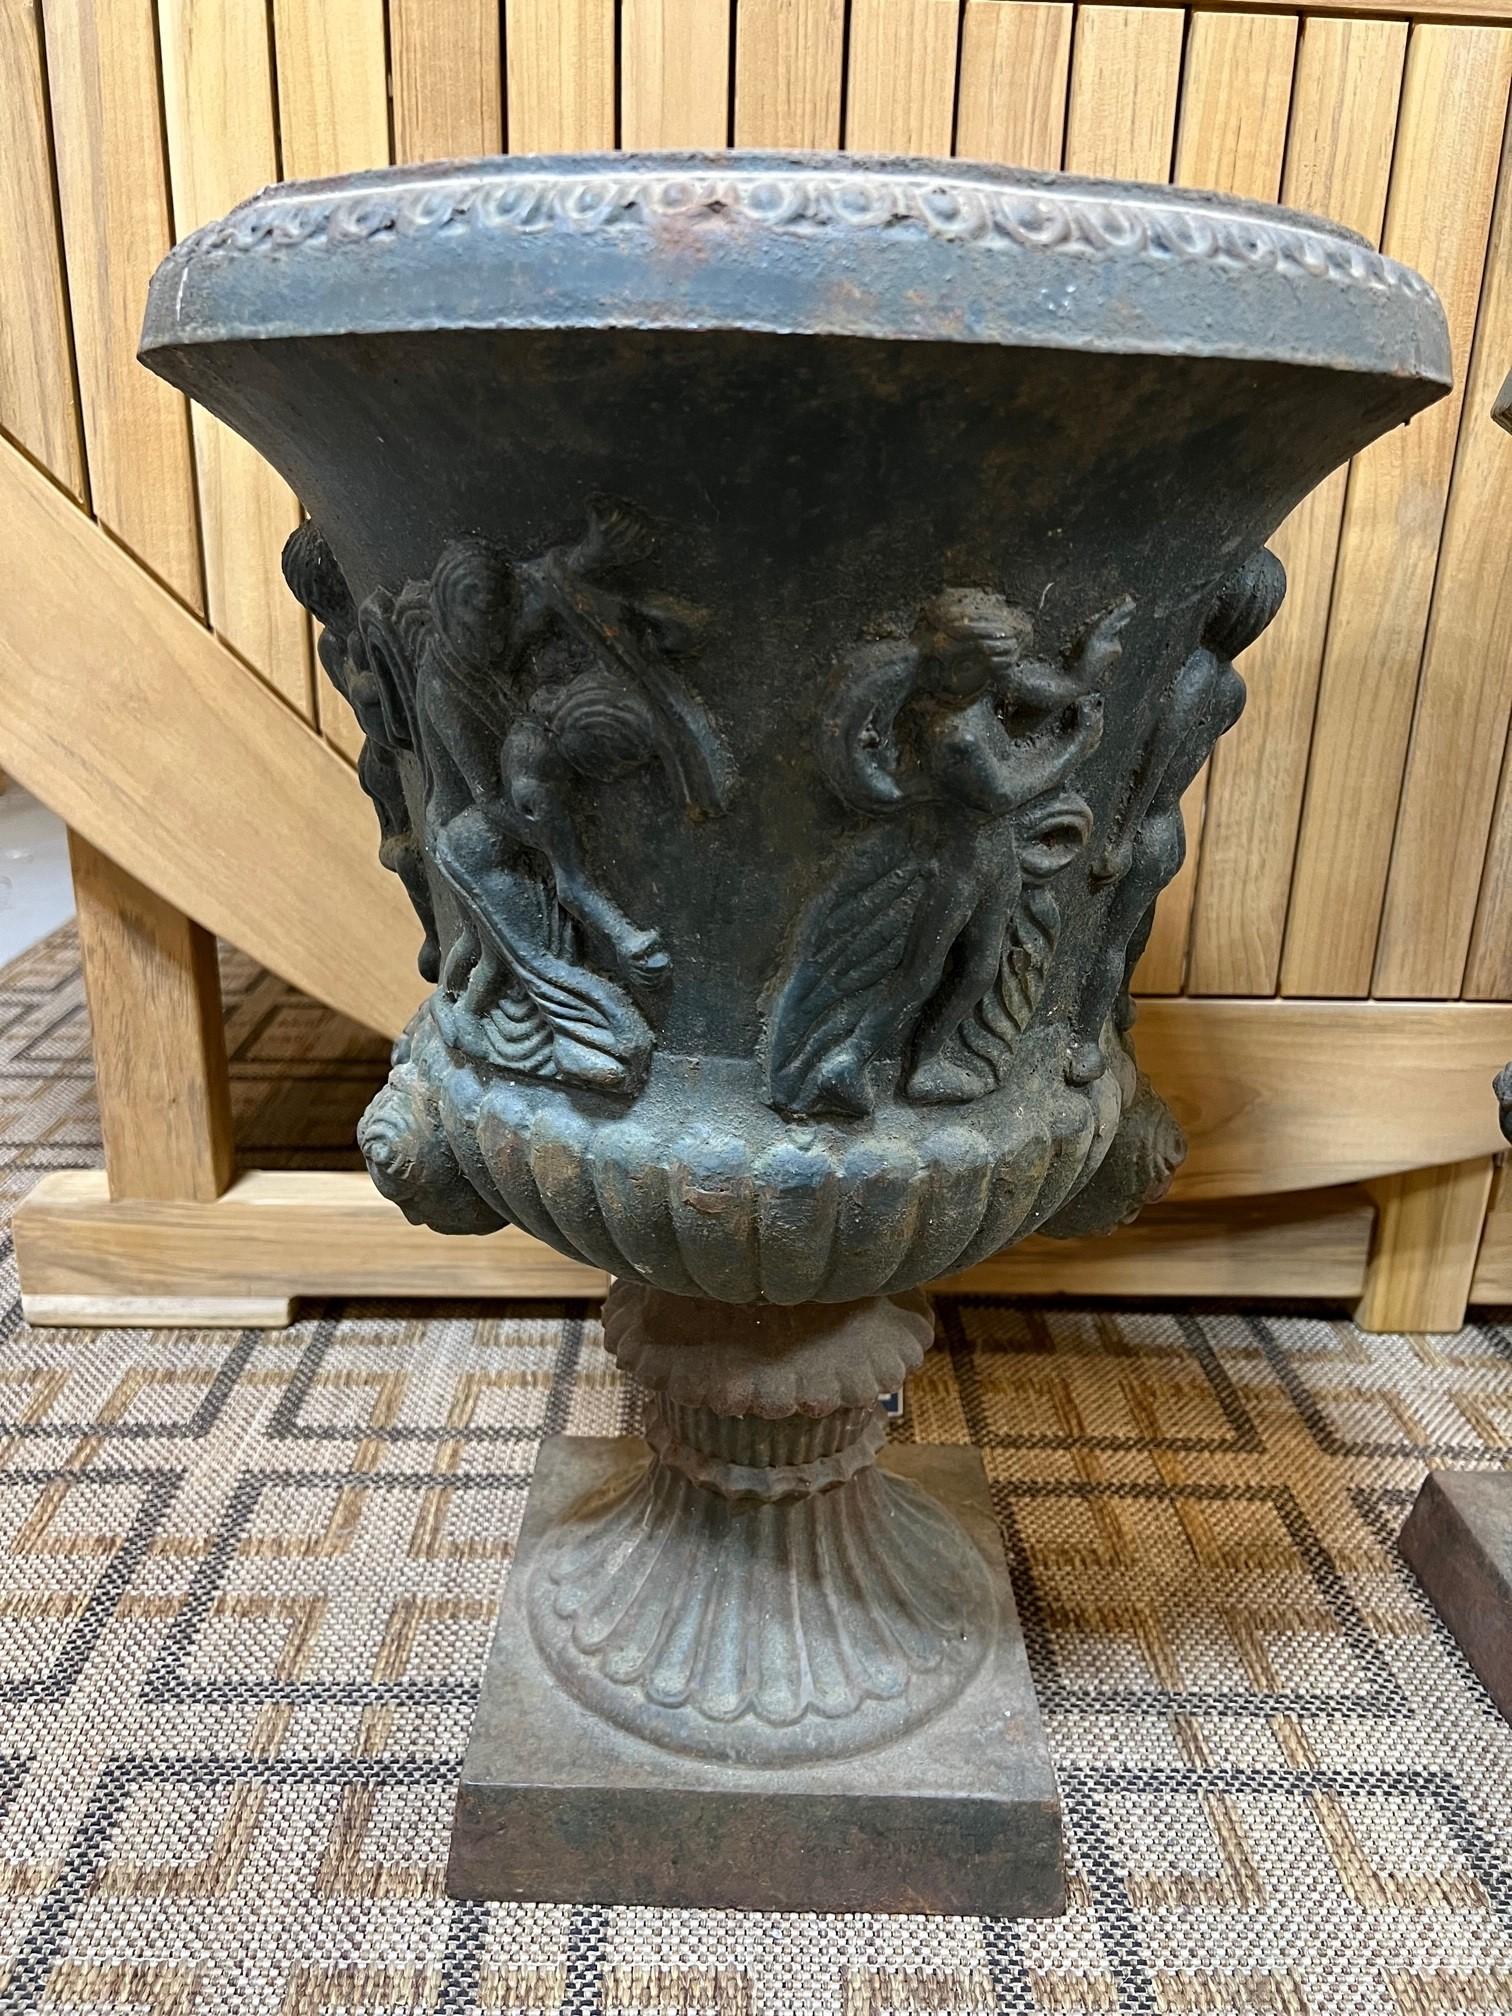 Magnificent pair of neoclassical revival cast iron garden urns. The urns are decorated with Greco-Roman figures with a fluted column base. A beautiful pair of cast iron figural urns from an estate in Greenwich Ct. They are a nice size for any garden